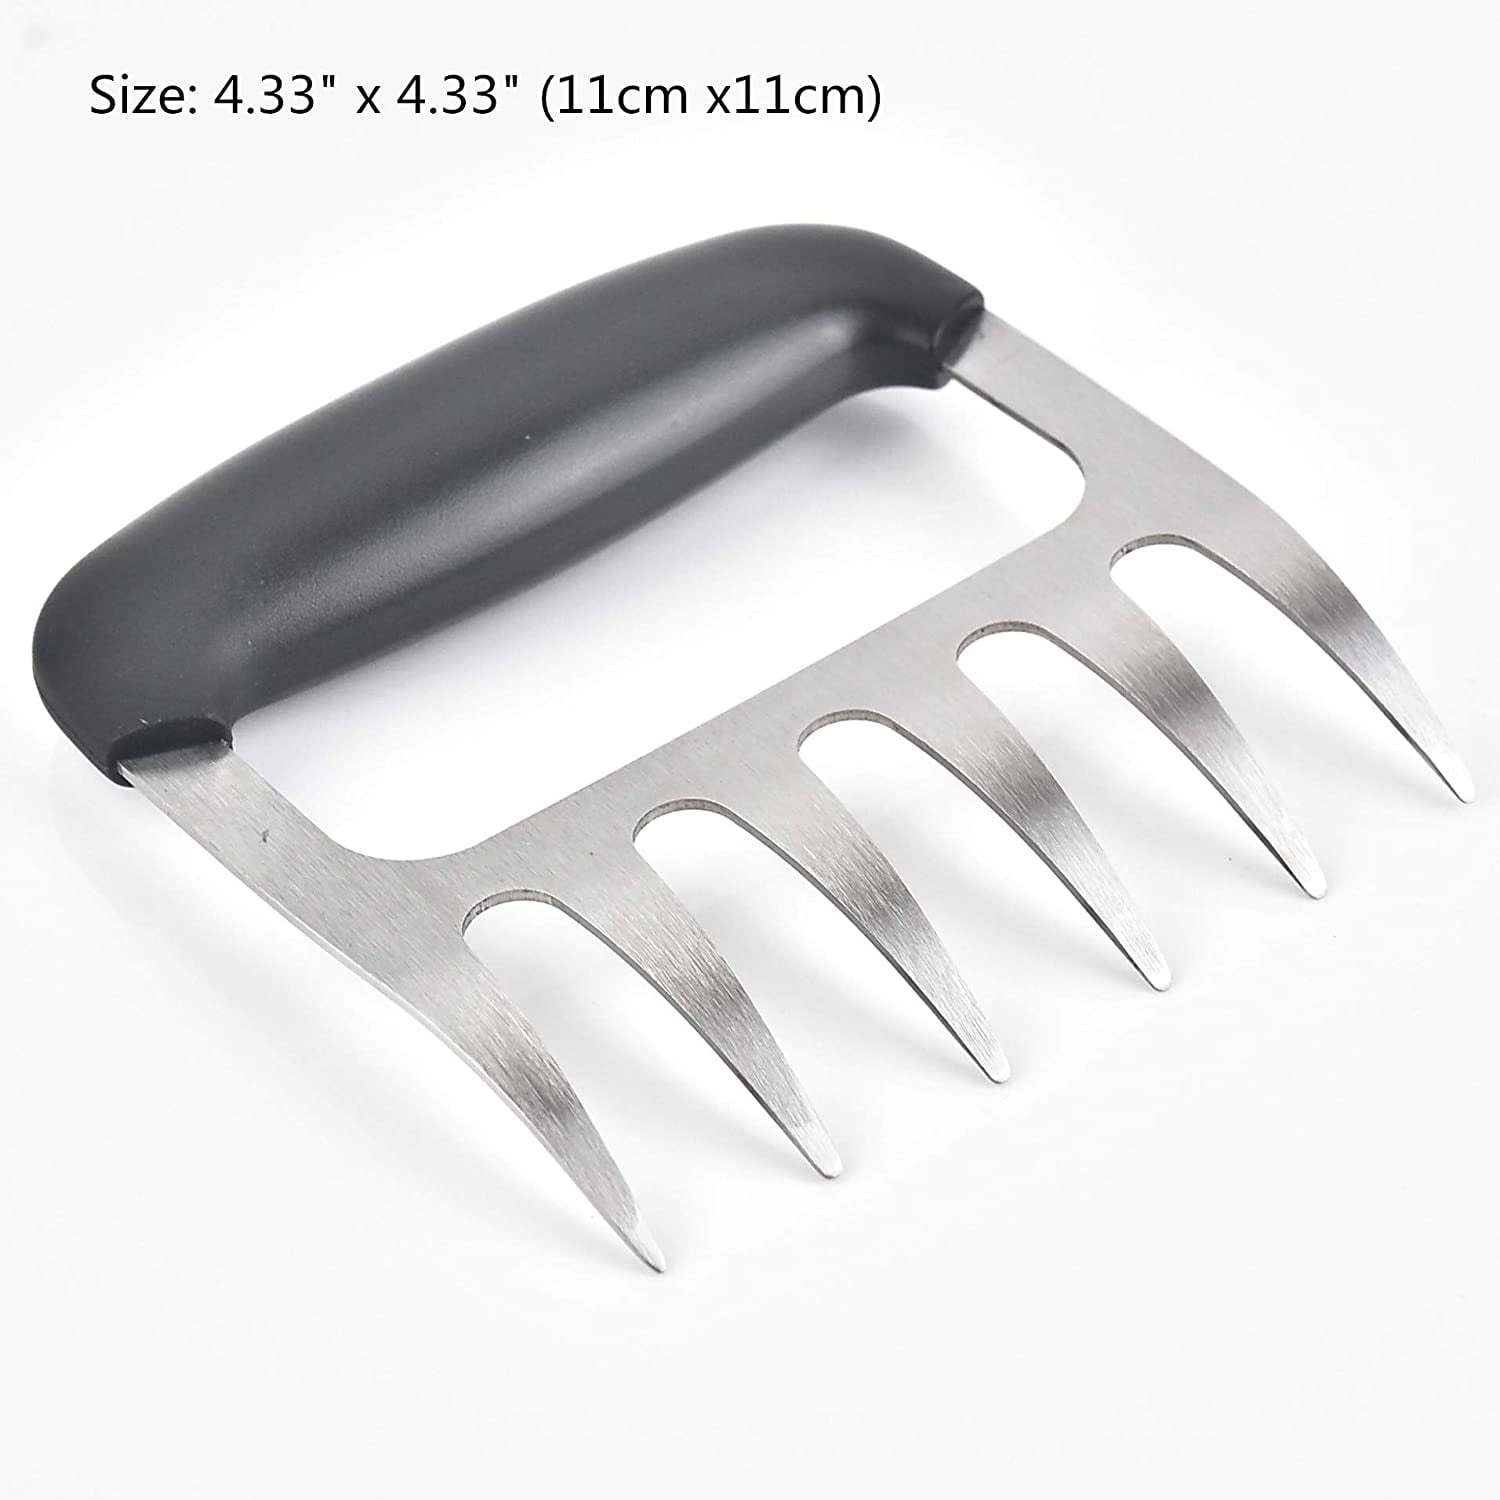 Meat Shredder Grill Smoker Bear Paw Meat Claws BBQ Grill Meat Handler Forks Tool